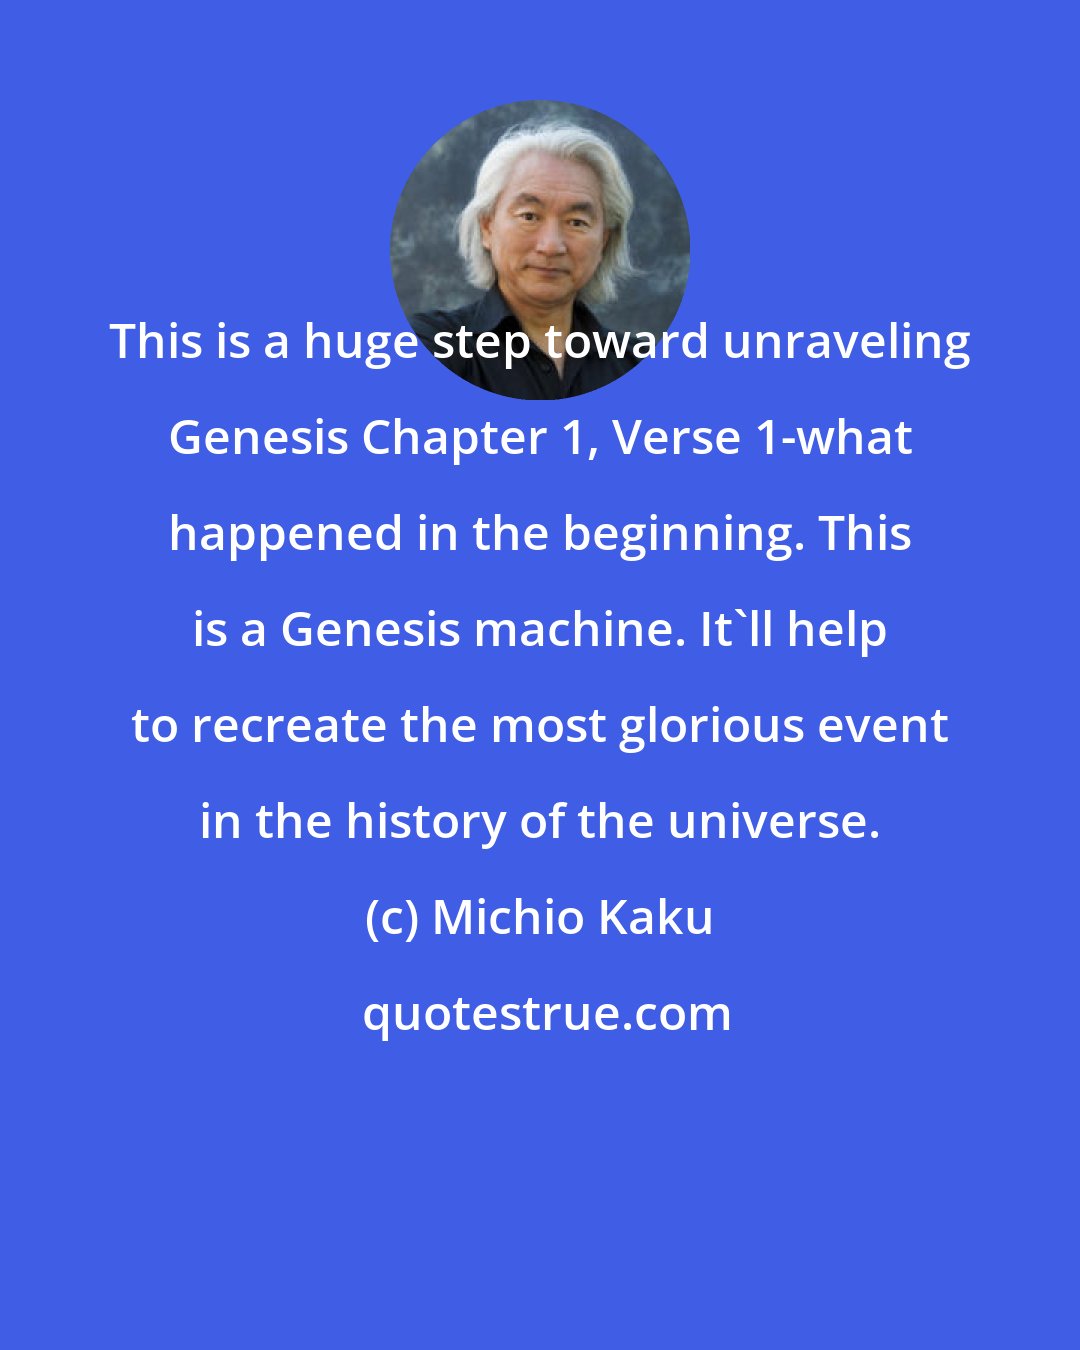 Michio Kaku: This is a huge step toward unraveling Genesis Chapter 1, Verse 1-what happened in the beginning. This is a Genesis machine. It'll help to recreate the most glorious event in the history of the universe.